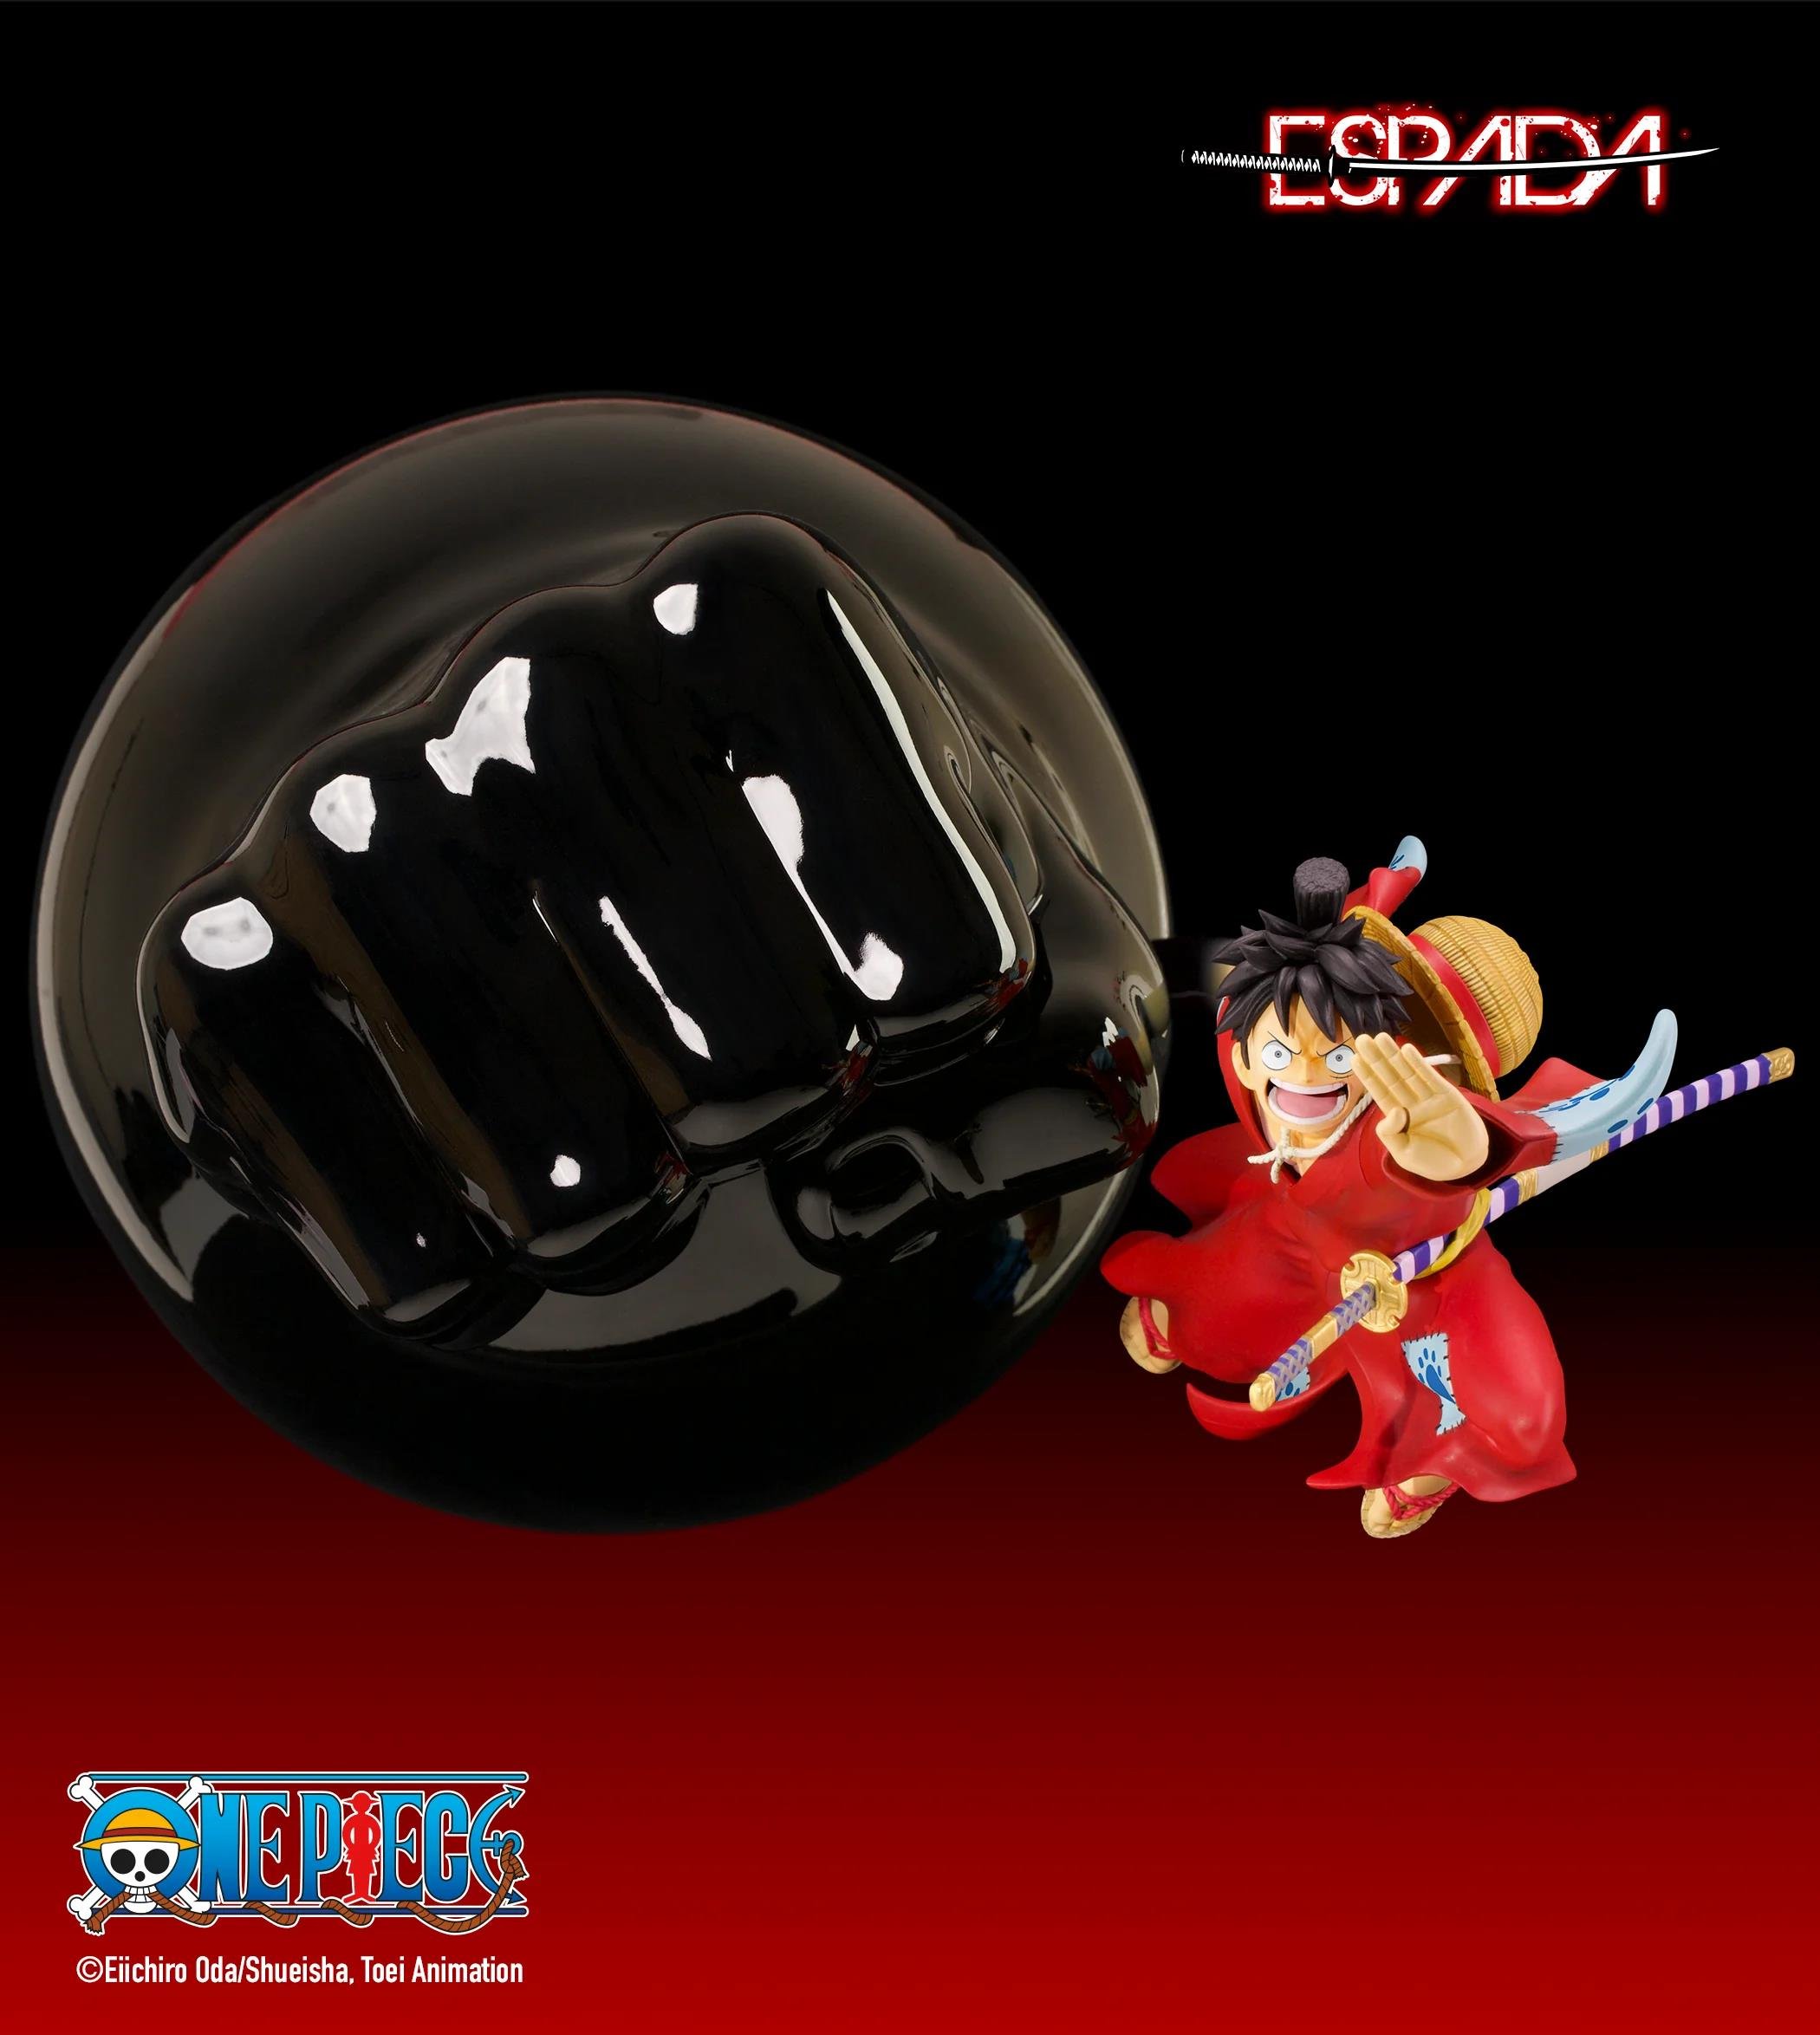 One Piece Luffy Power Painting  Decoration at Wholesale Prices